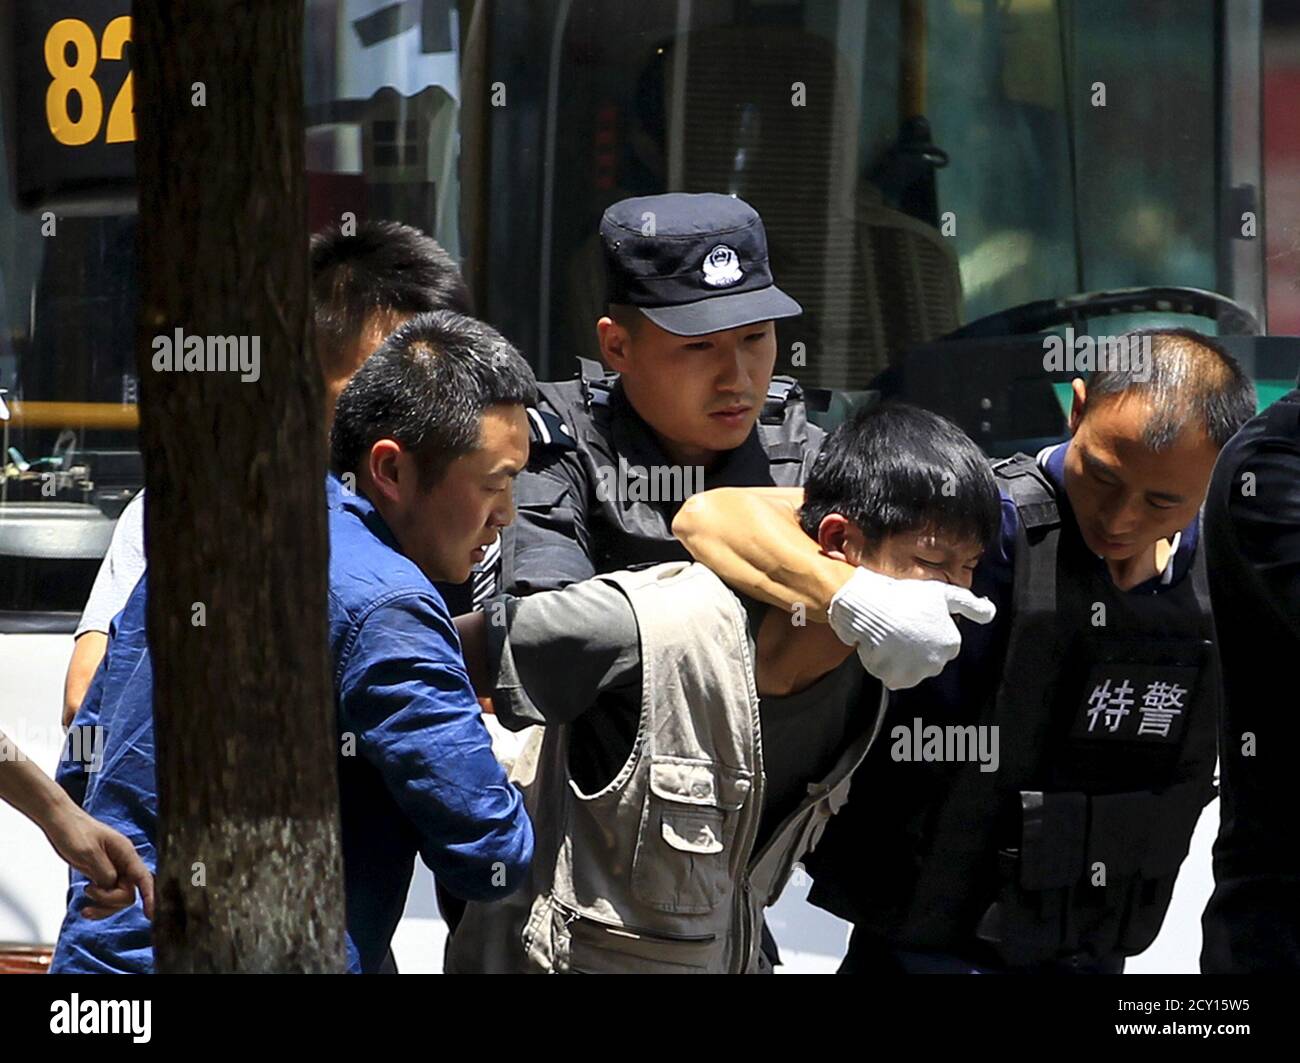 Policemen arrest a man (C), who held a woman hostage on a bus, on a street in Kunming, Yunnan province, China, May 14, 2015. Local police managed to rescue the hostage and arrest the man with the use of a stunt grenade after 90 minutes of negotiation. The reason of the crime is under investigation, local media reported. REUTERS/Wong Campion Stock Photo